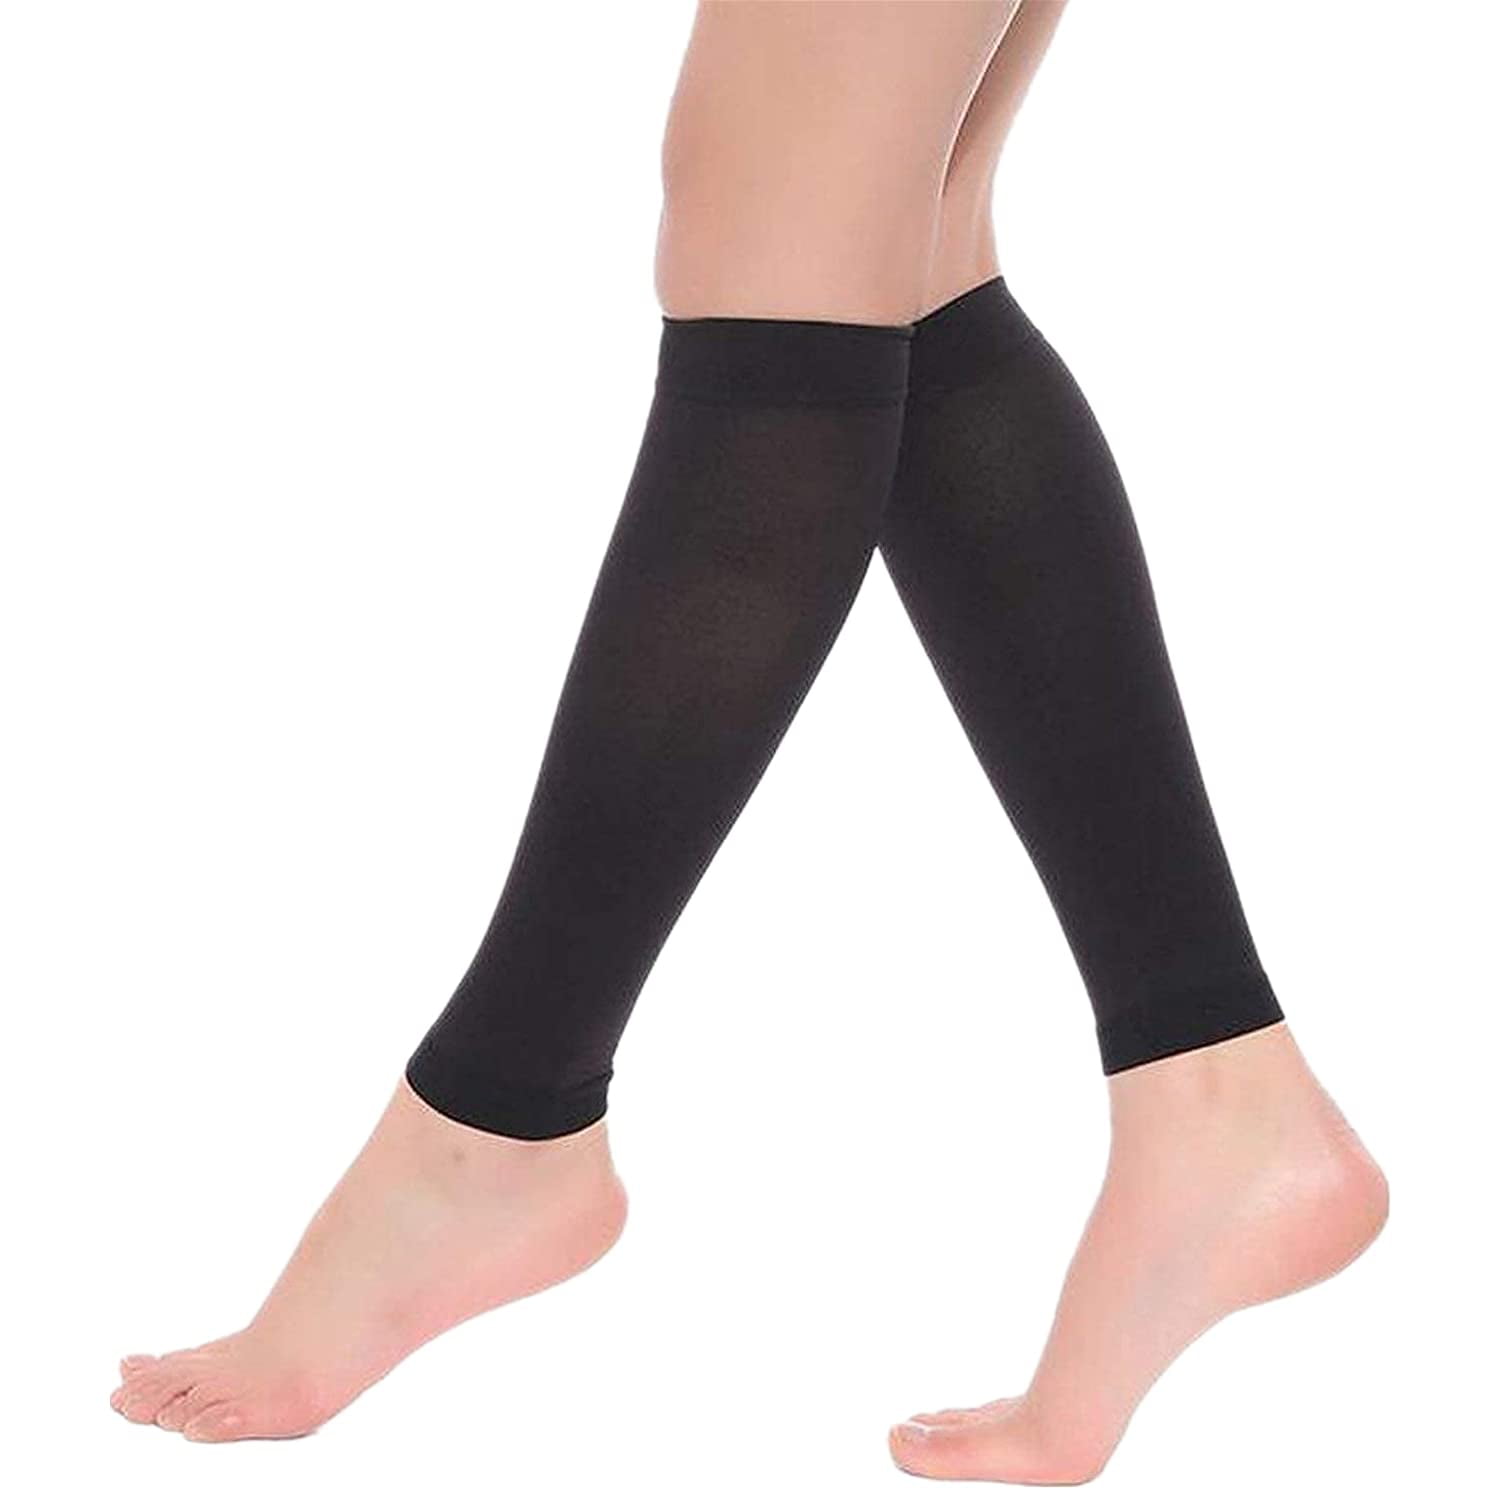 Calf Compression Sleeve for Men & Women, 1 Pair, Footless Compression ...